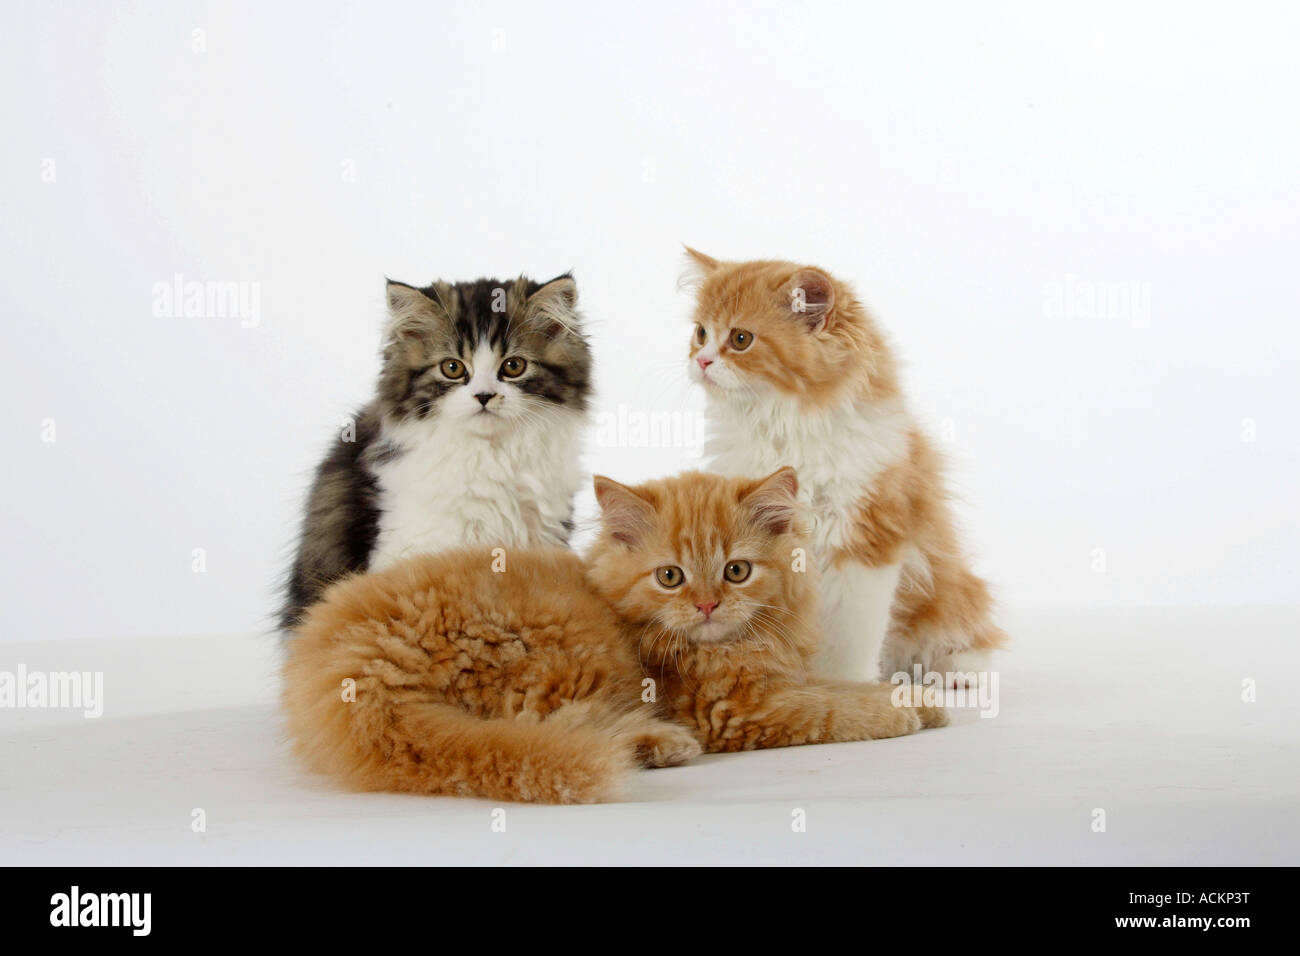 Les chats Chatons persan Banque D'Images